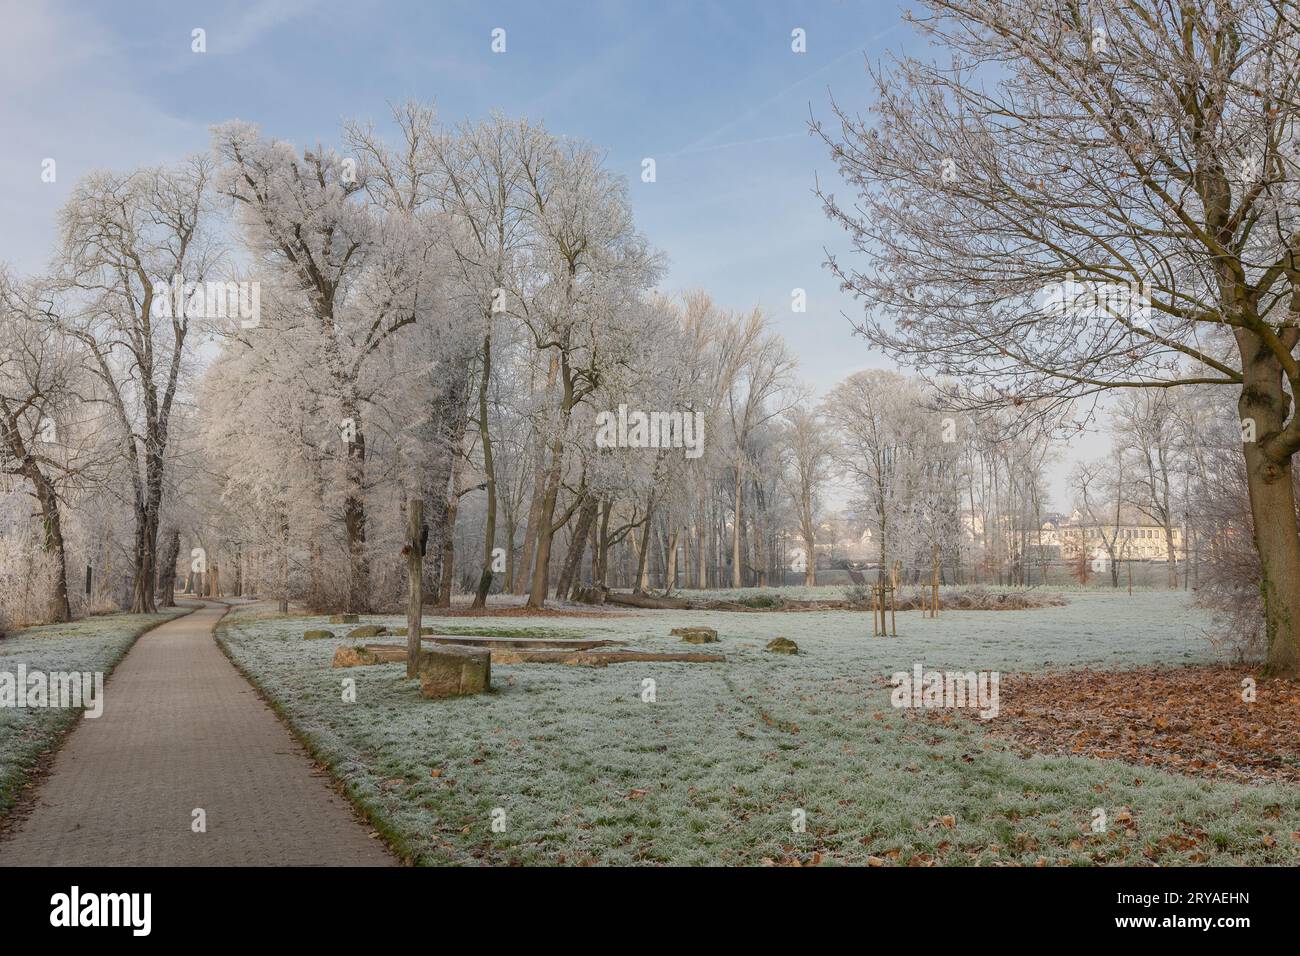 Hoar frost on trees and grass in a park with a footpath Stock Photo